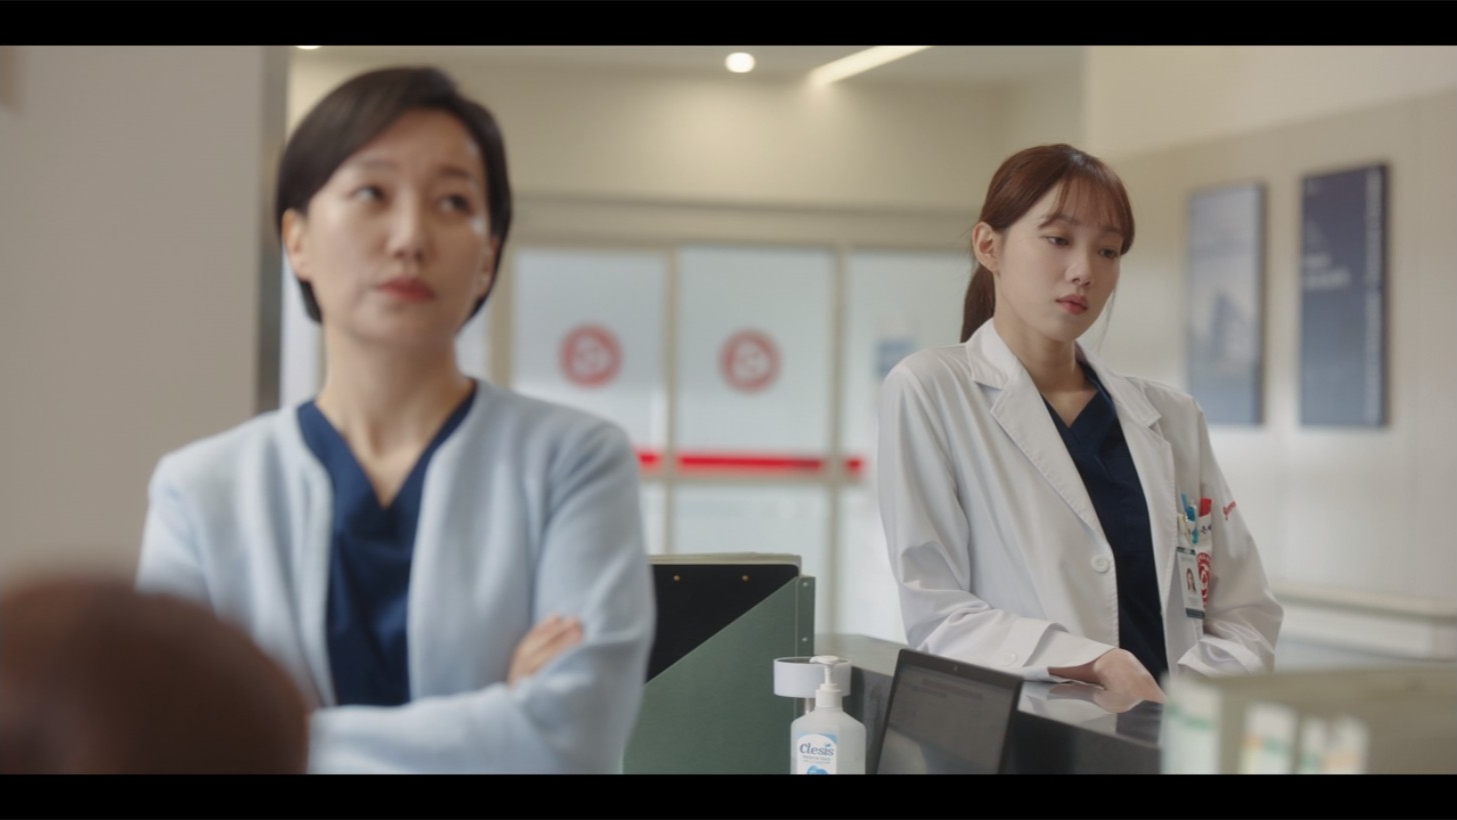 Lee Sung-kyung and Jin Kyung in Romantic Doctor Teacher Kim 3: Episodes 13-14